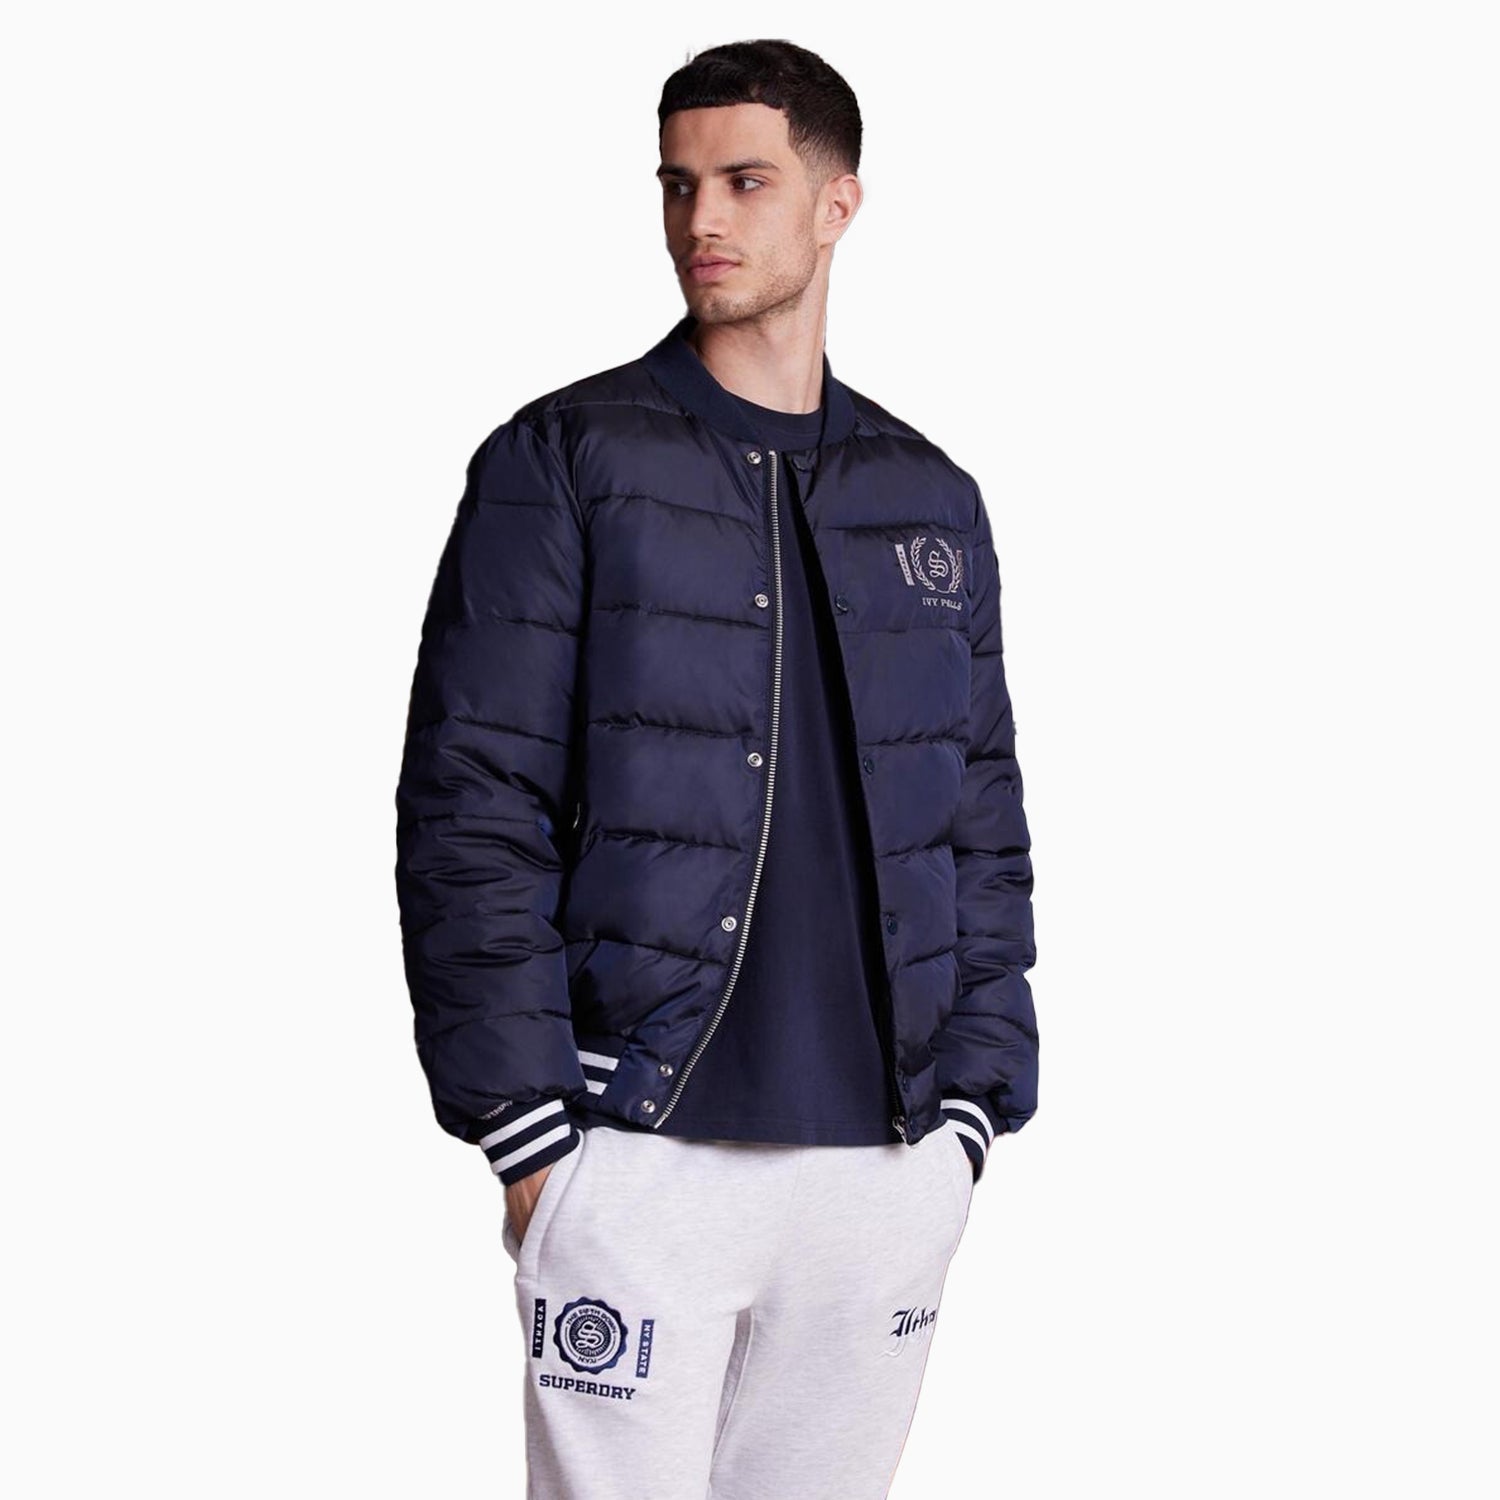 Superdry Men's Varsity Baseball Puffer Jacket - Color: Eclipse Navy - Tops and Bottoms USA -